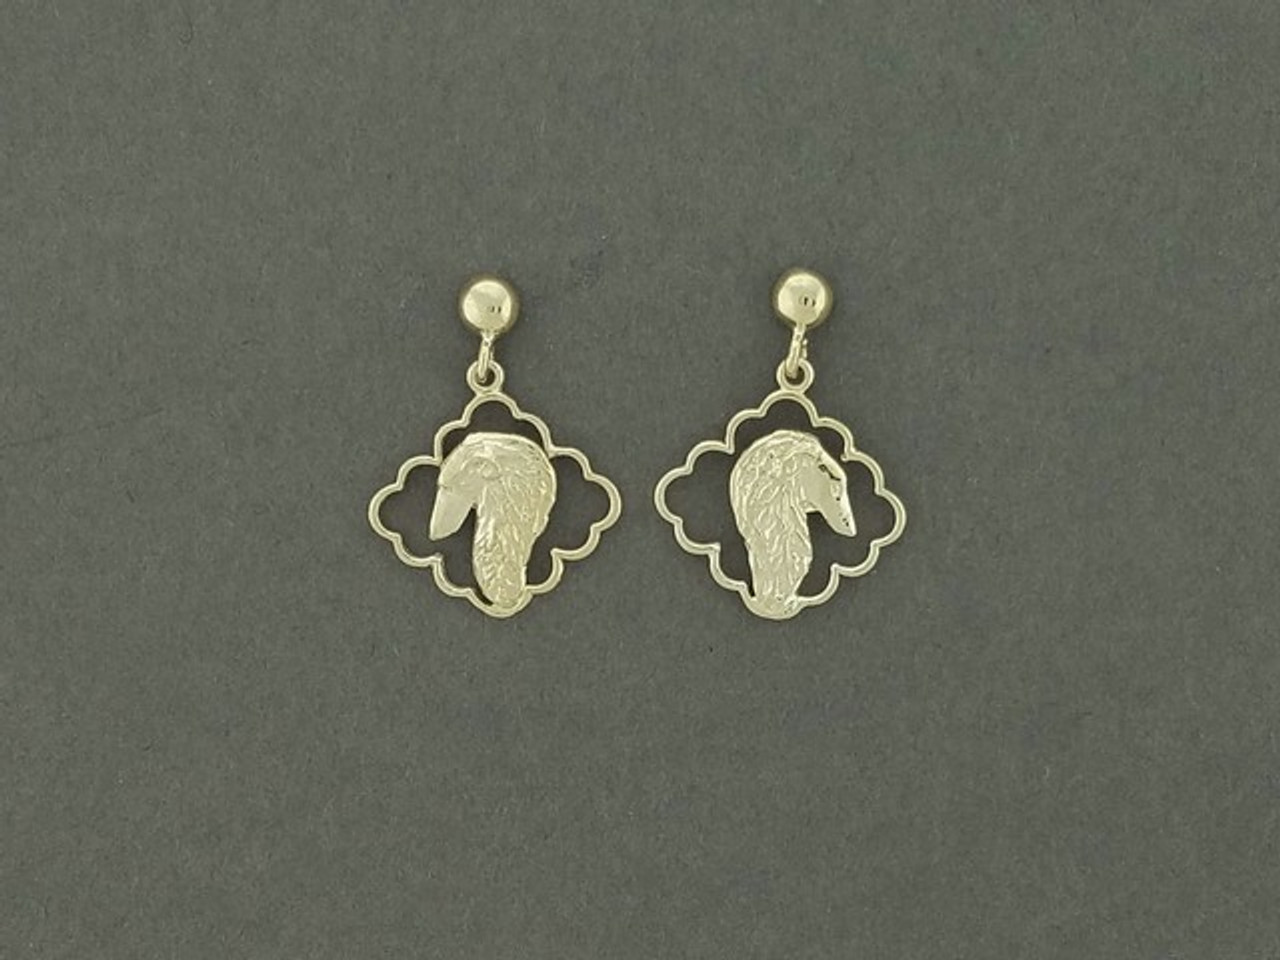 Earrings Rectangular Wire Curved With Borzoi